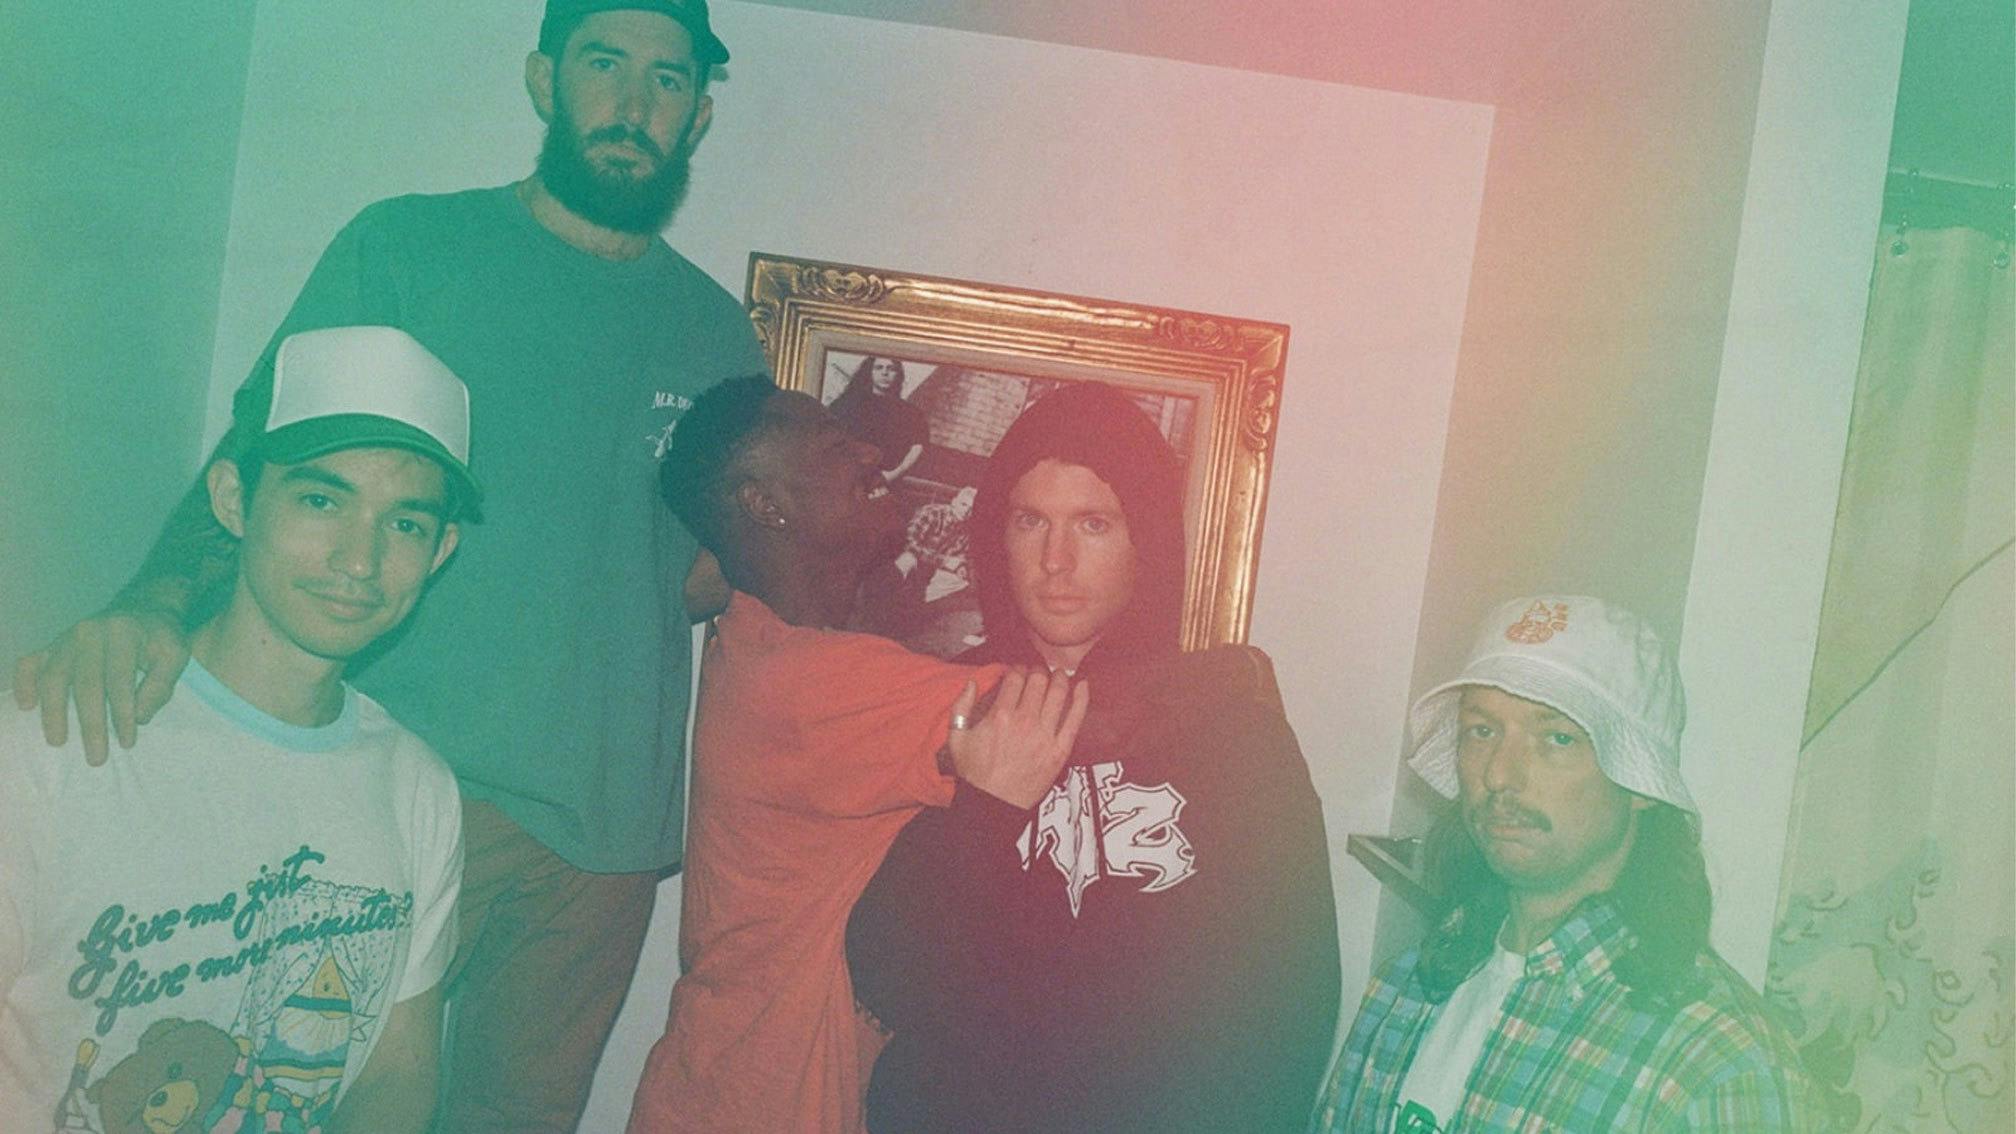 Turnstile to perform on Jimmy Kimmel Live! this week